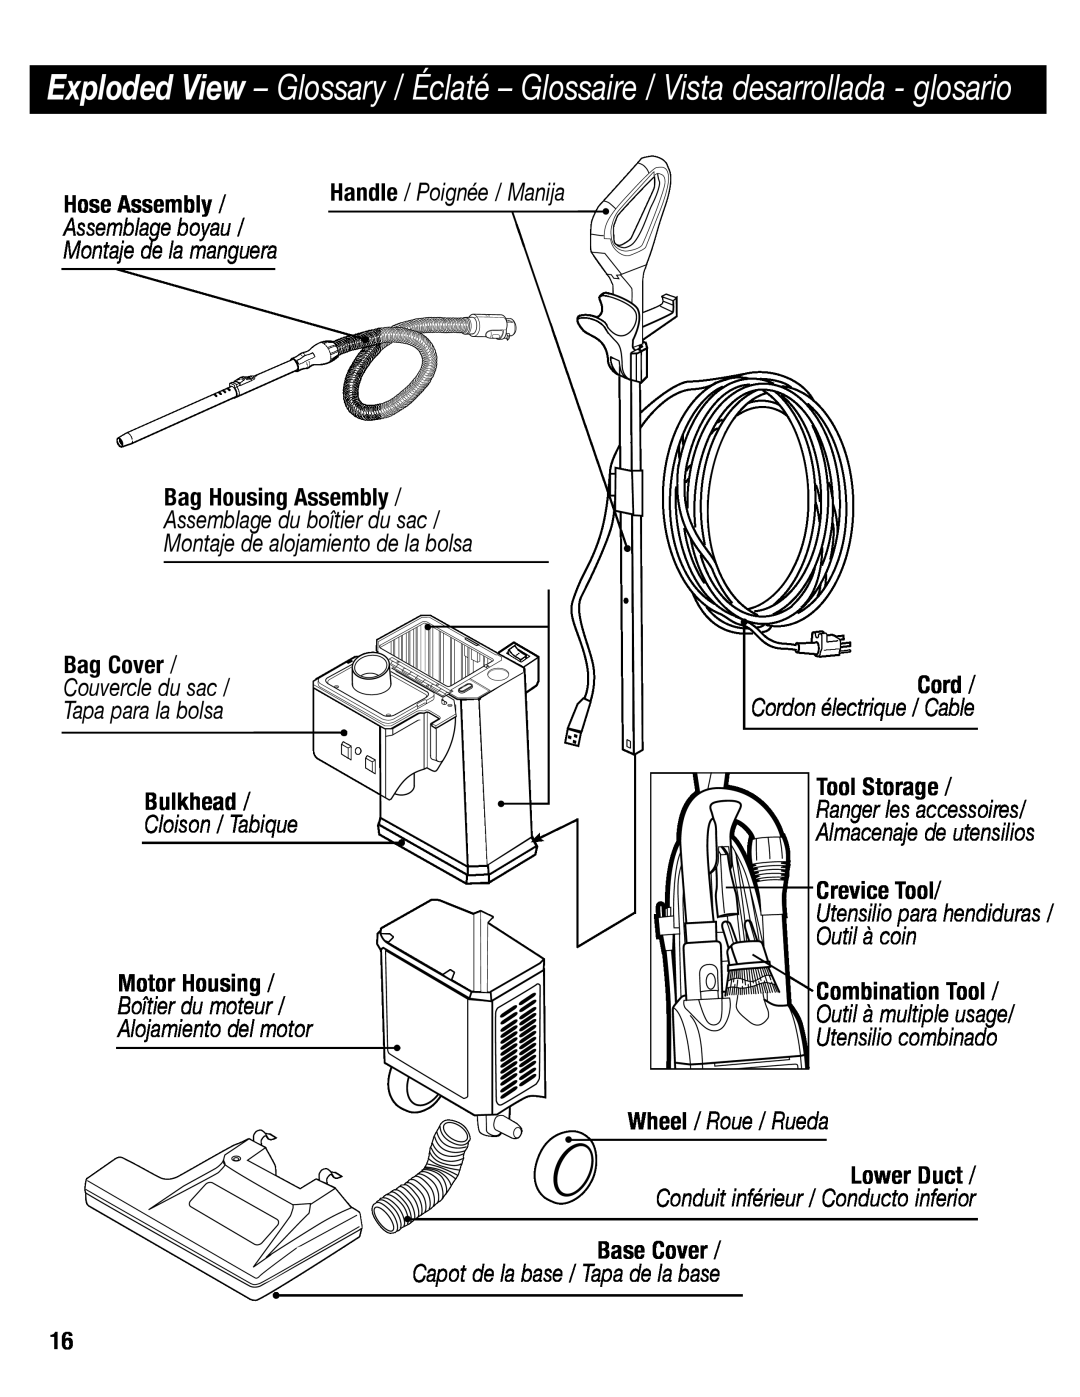 Eureka SC6610 manual Hose Assembly, Bag Housing Assembly, Bag Cover, Bulkhead, Cord, Tool Storage, Crevice Tool, Lower Duct 